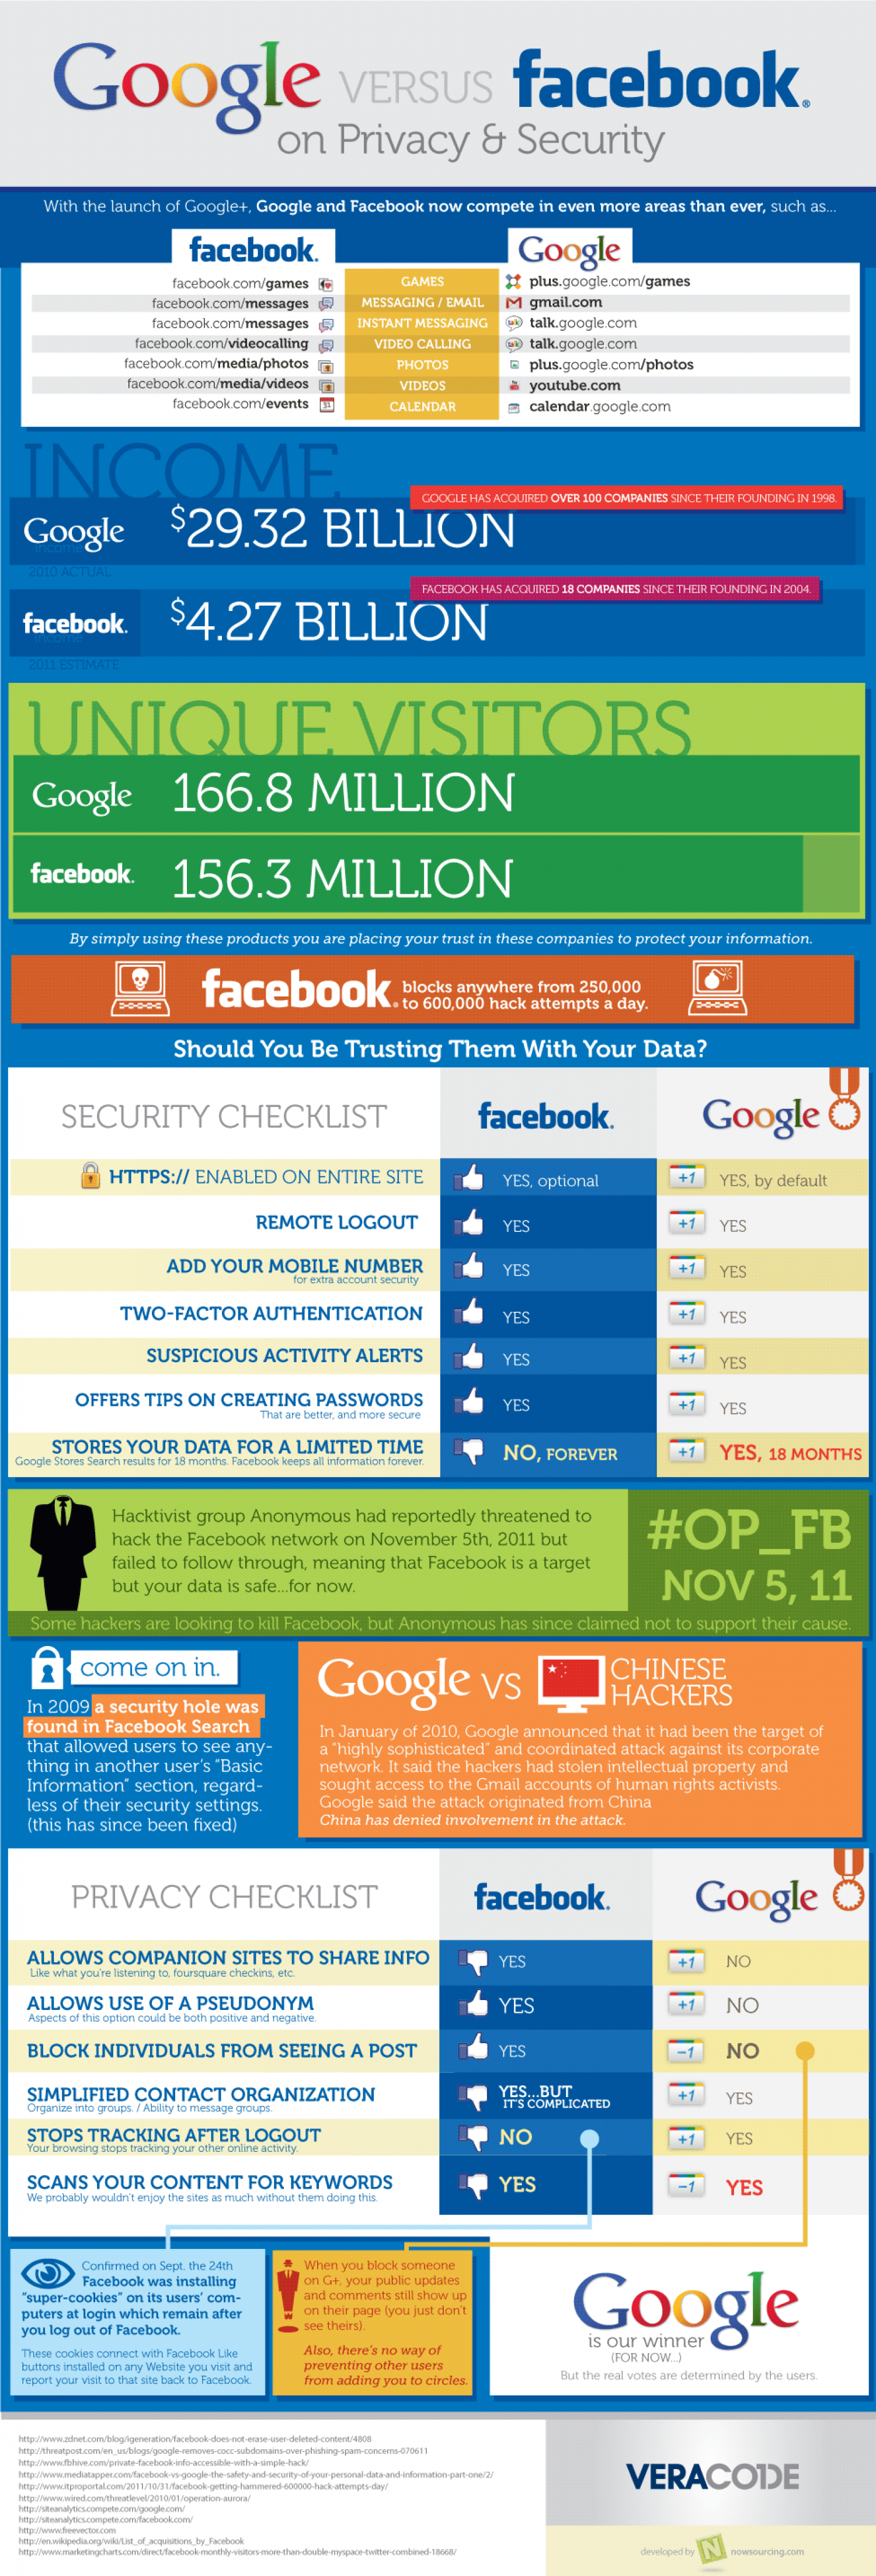 Google vs. Facebook on Privacy and Security Infographic